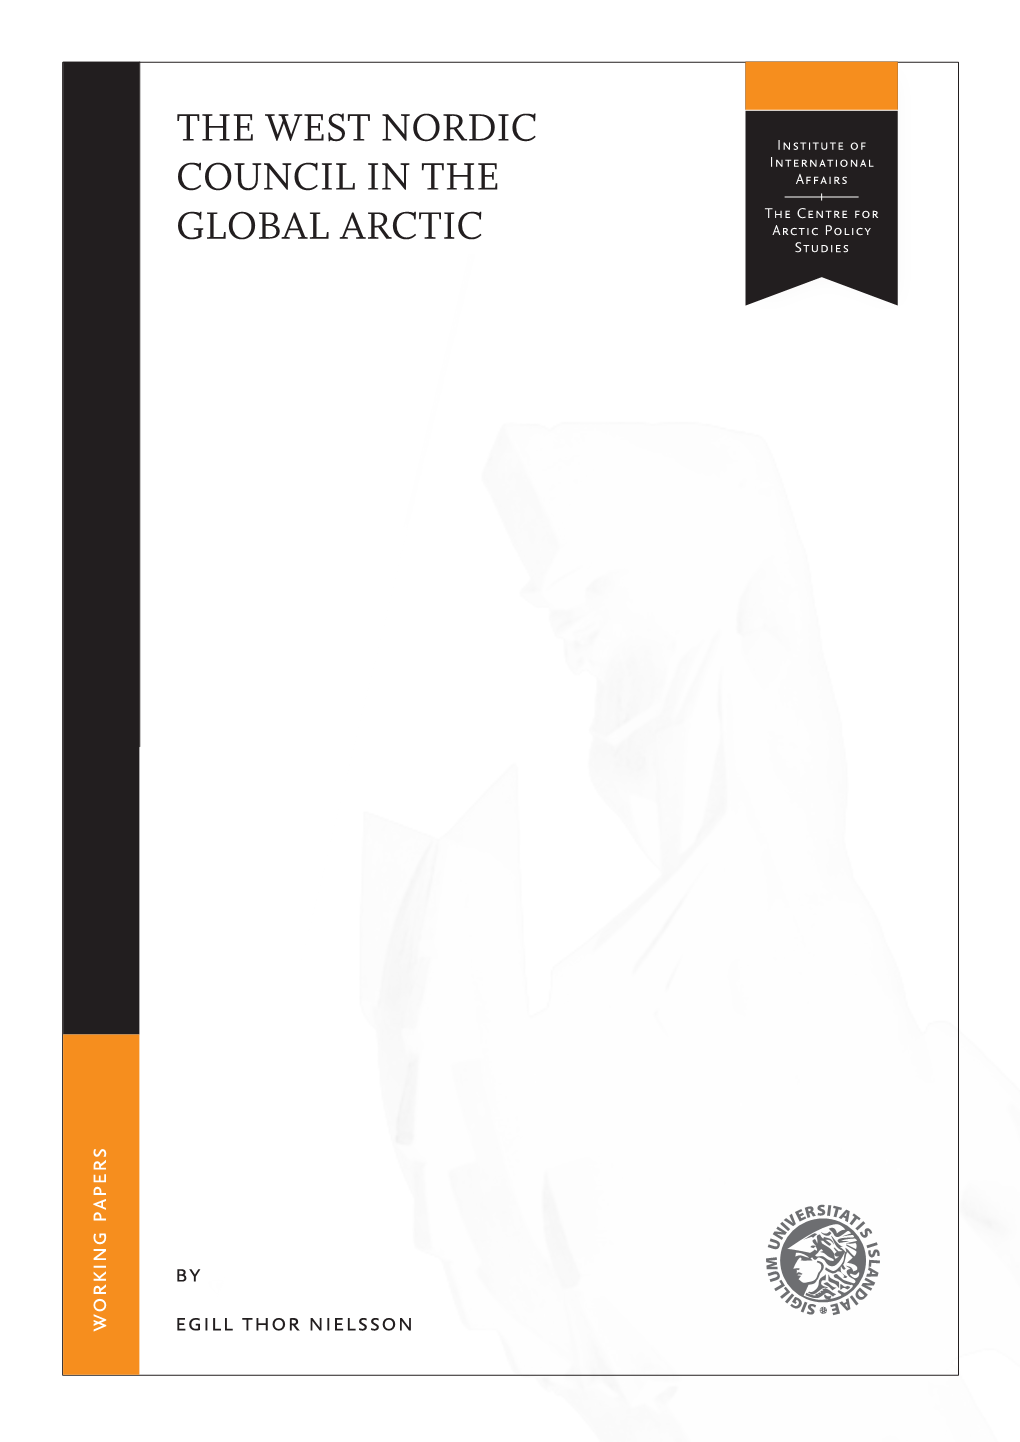 THE WEST NORDIC COUNCIL in the GLOBAL ARCTIC 1 by Egill Thor Nielsson 2